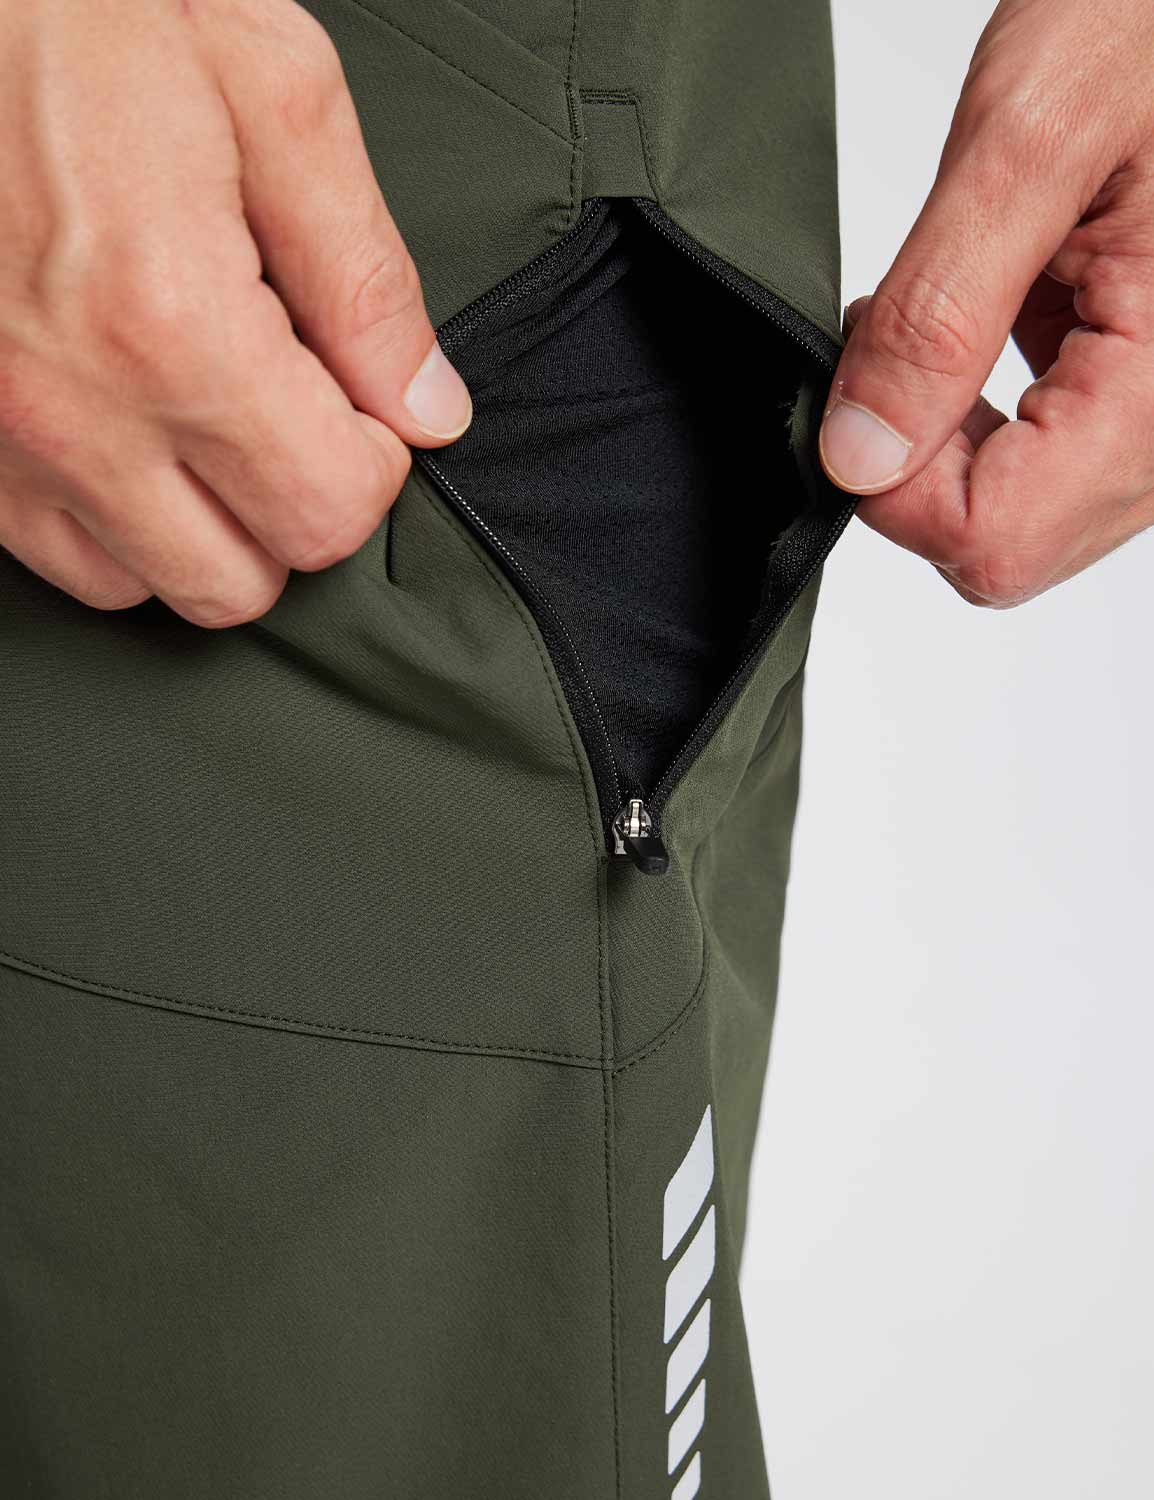 Baleaf Men's Flyleaf Water-Resistant Pocketed Cycling Pants dai039 Rifle Green Details